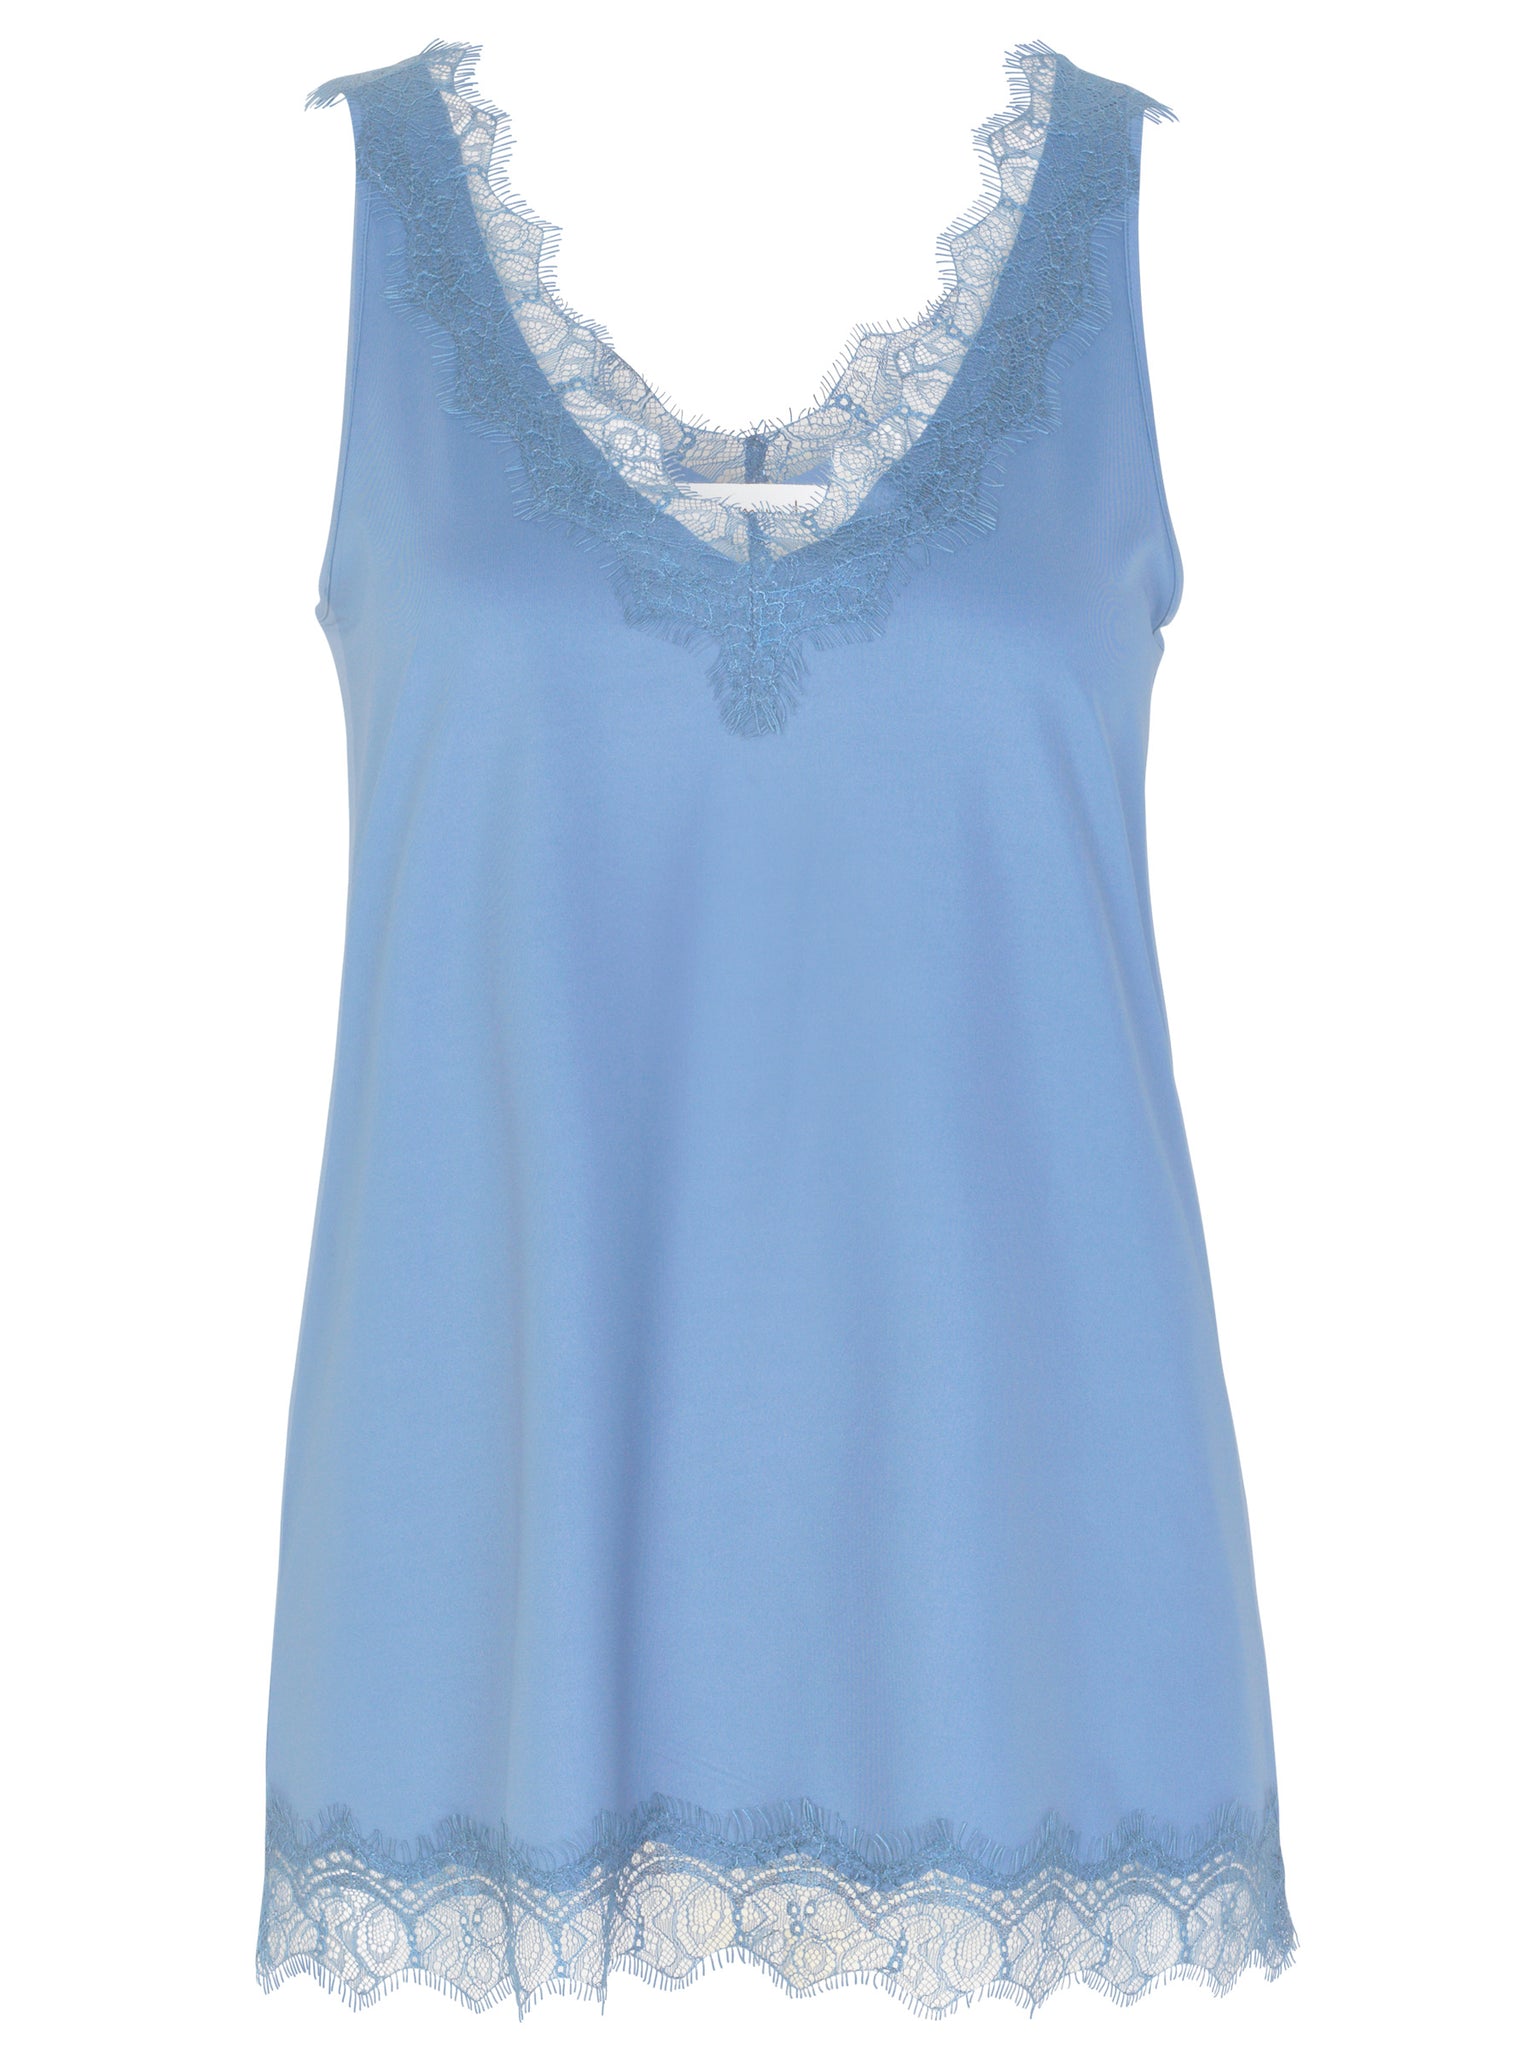 TOP WITH LACE, BLUE HEAVEN